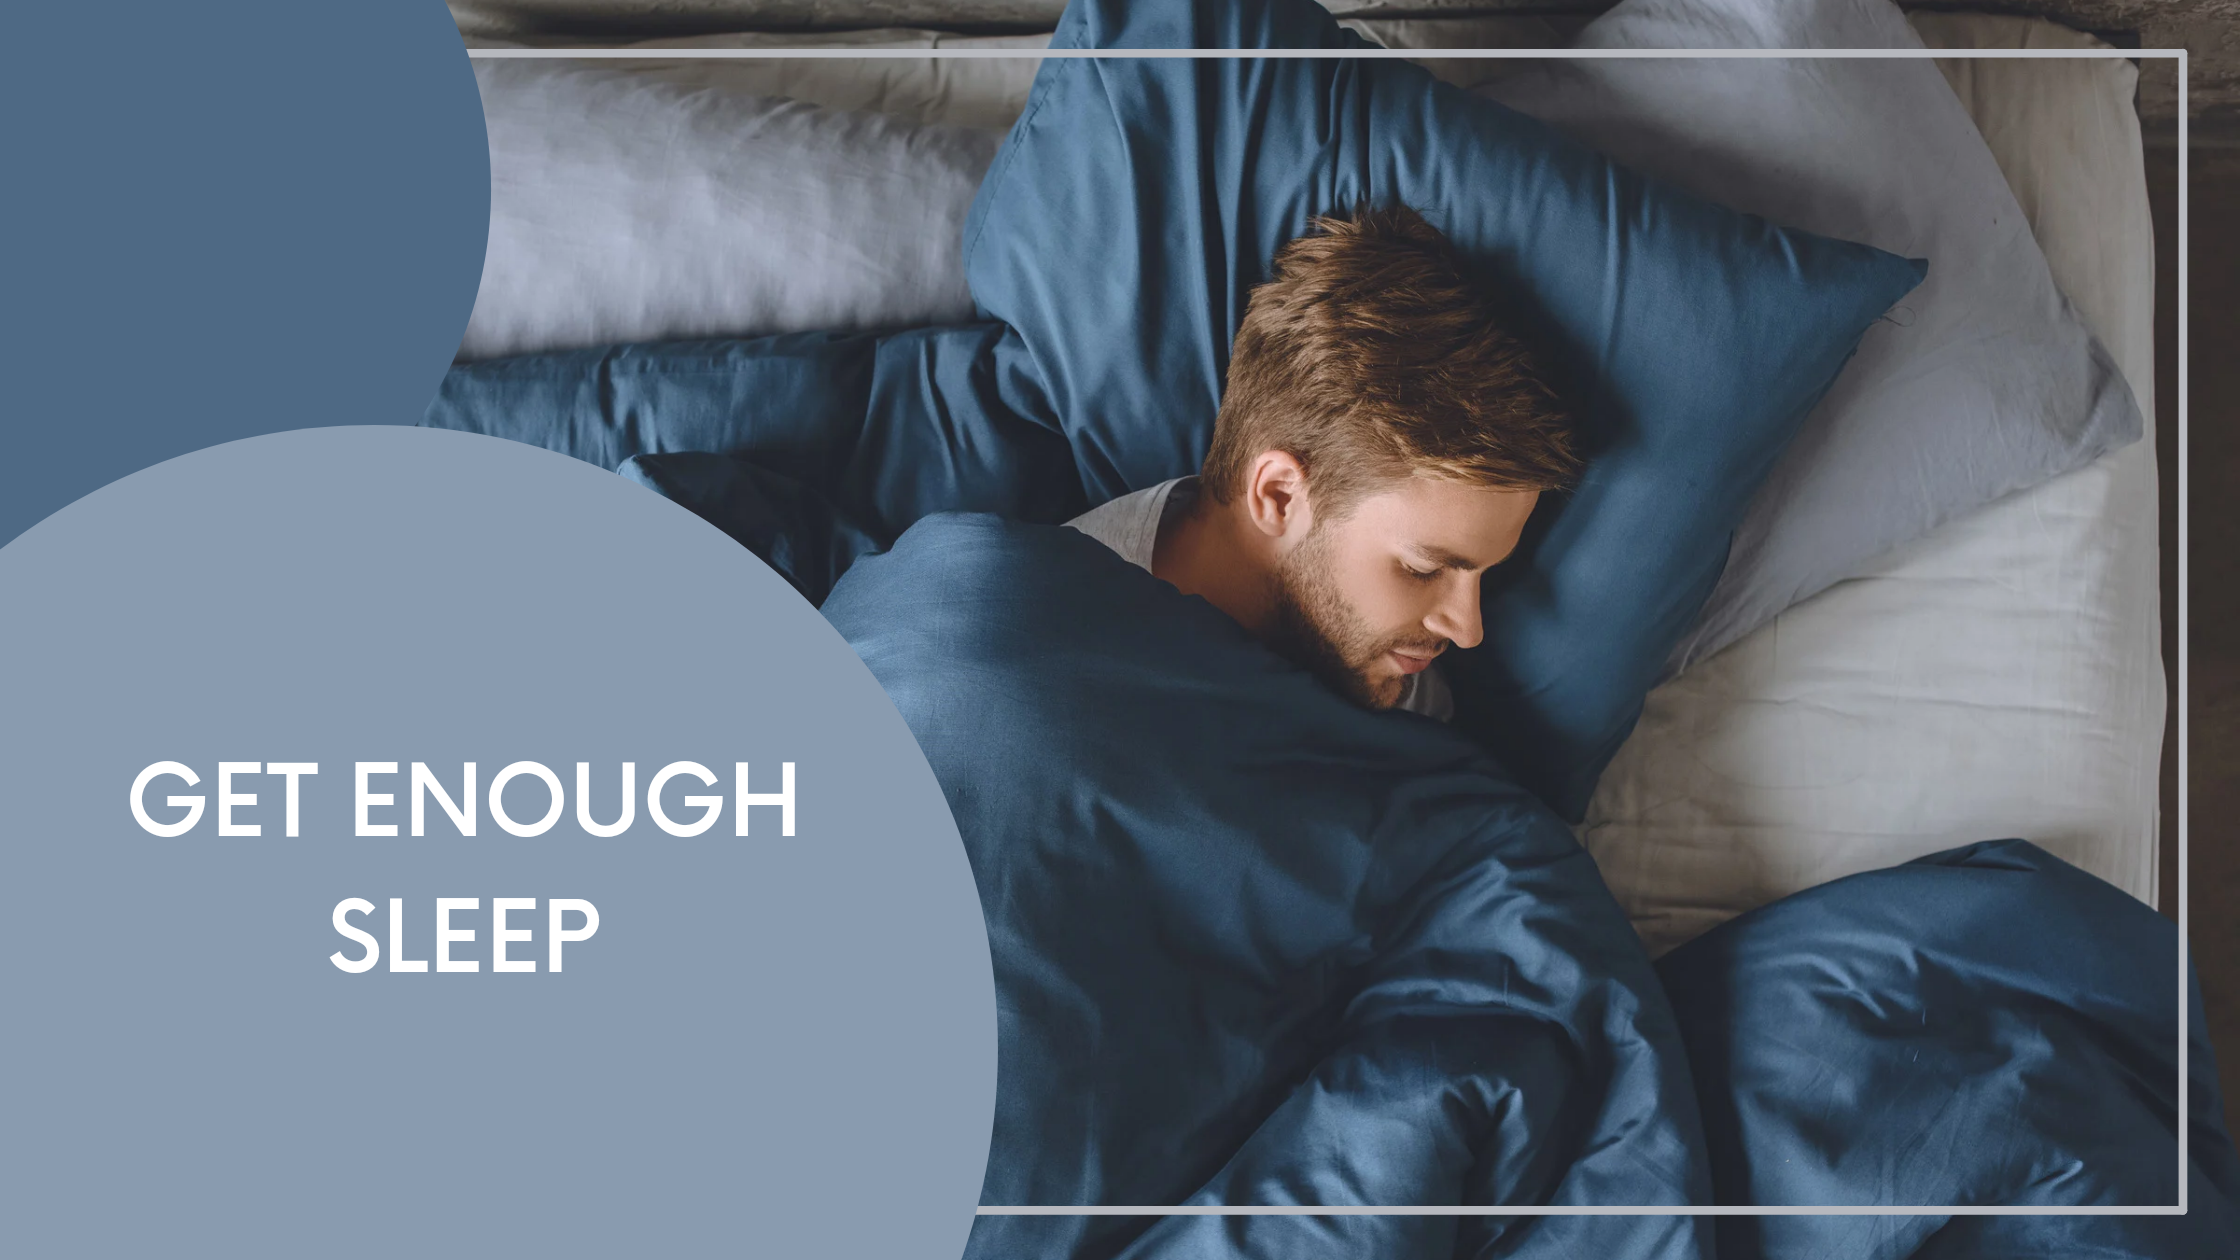 image showing a person getting enough sleep